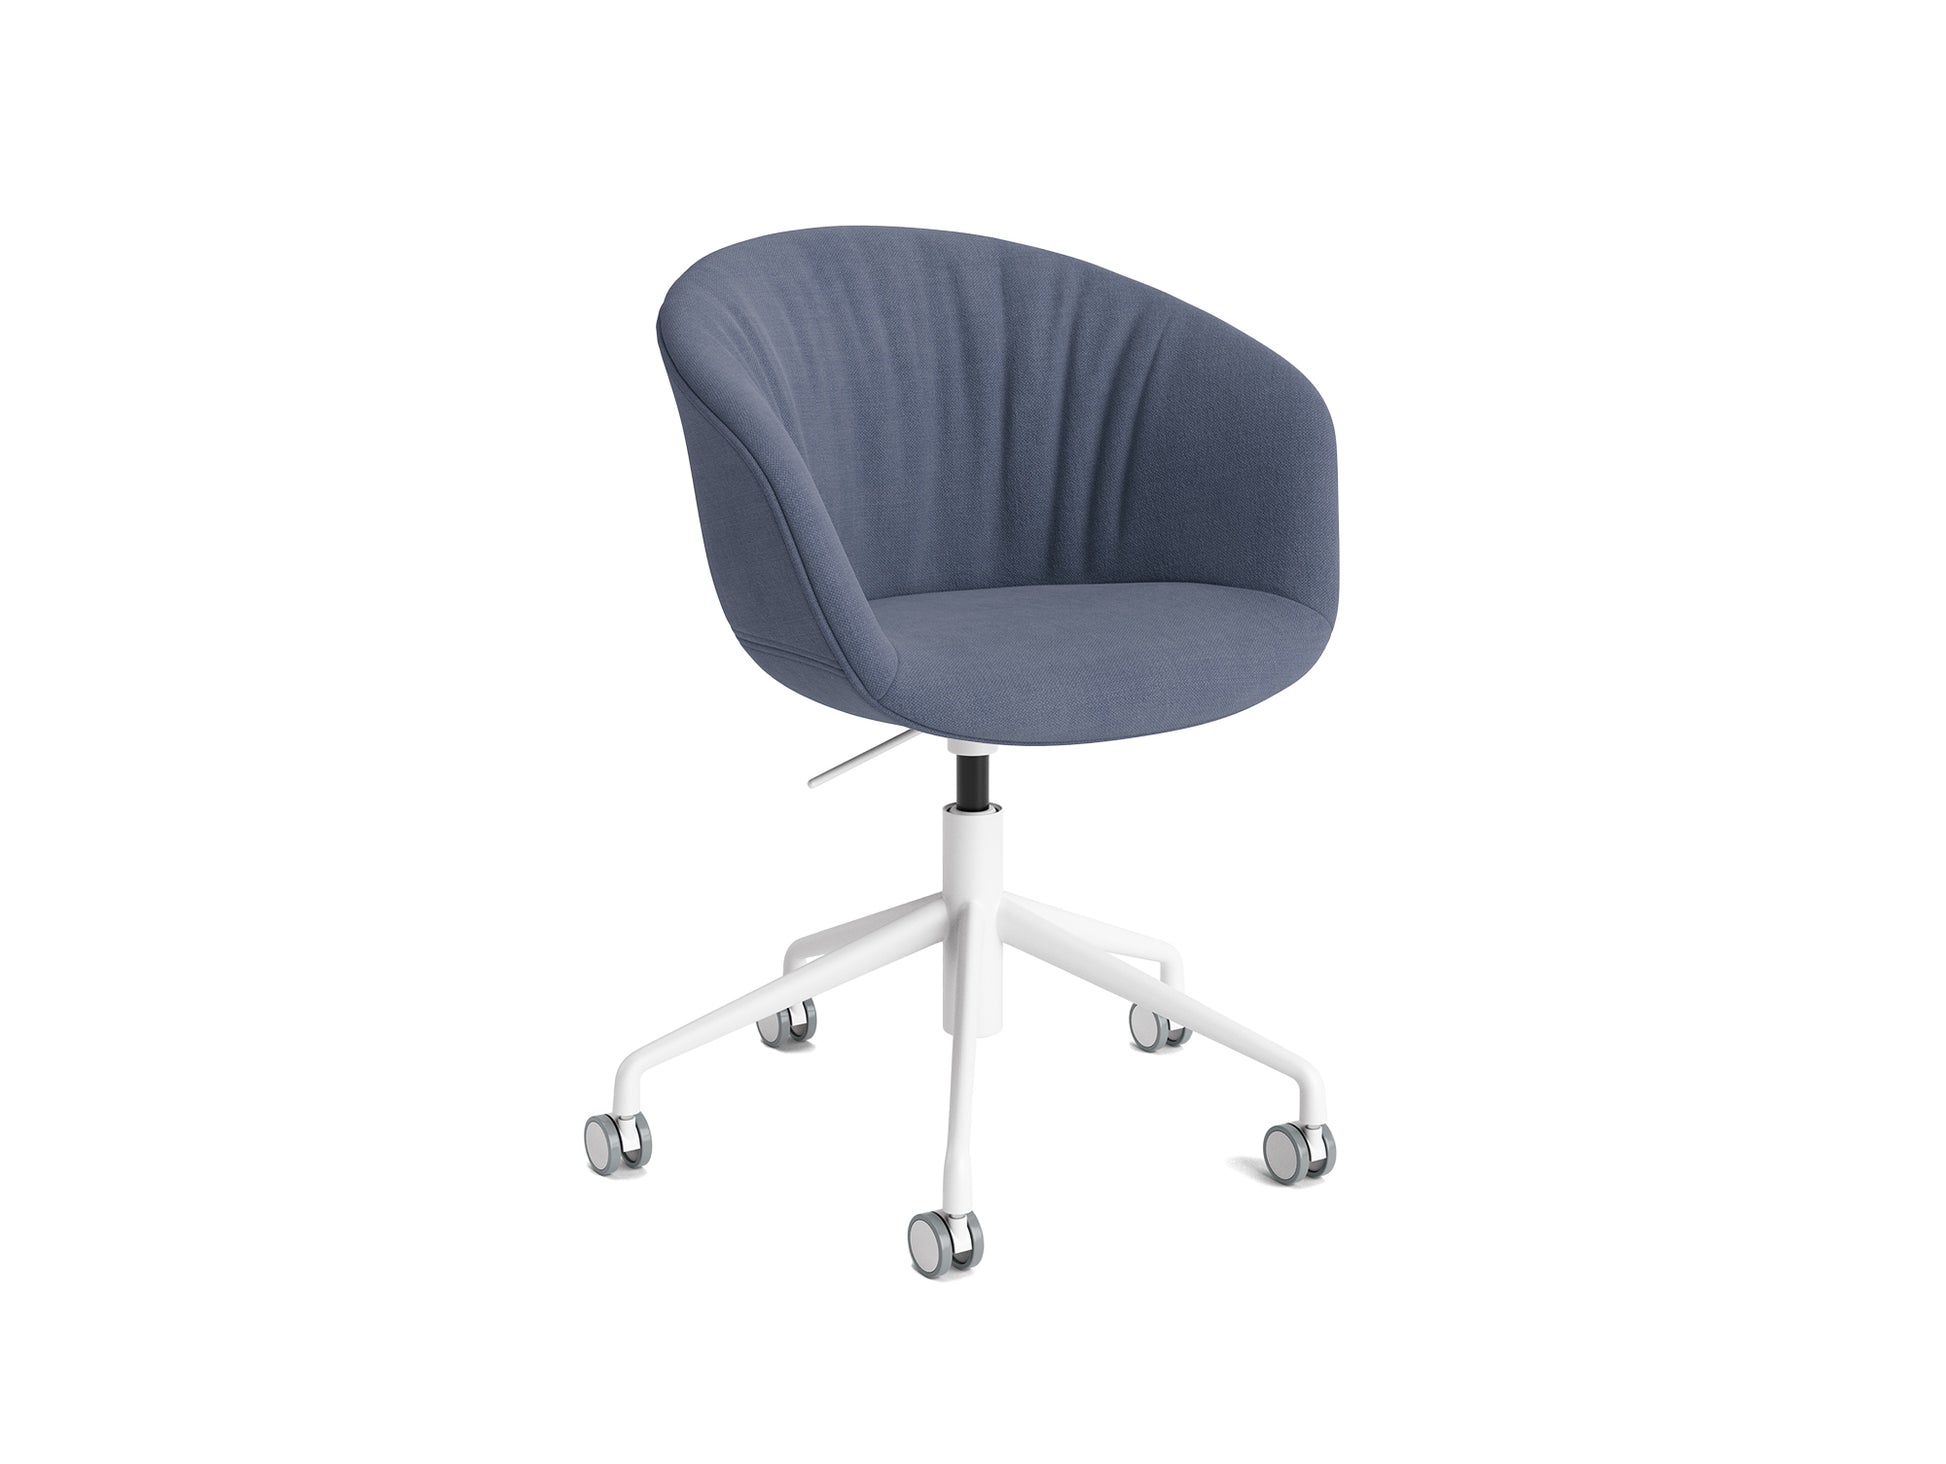 About A Chair AAC 53 Soft by HAY - Linara 198 / White Powder Coated Aluminium